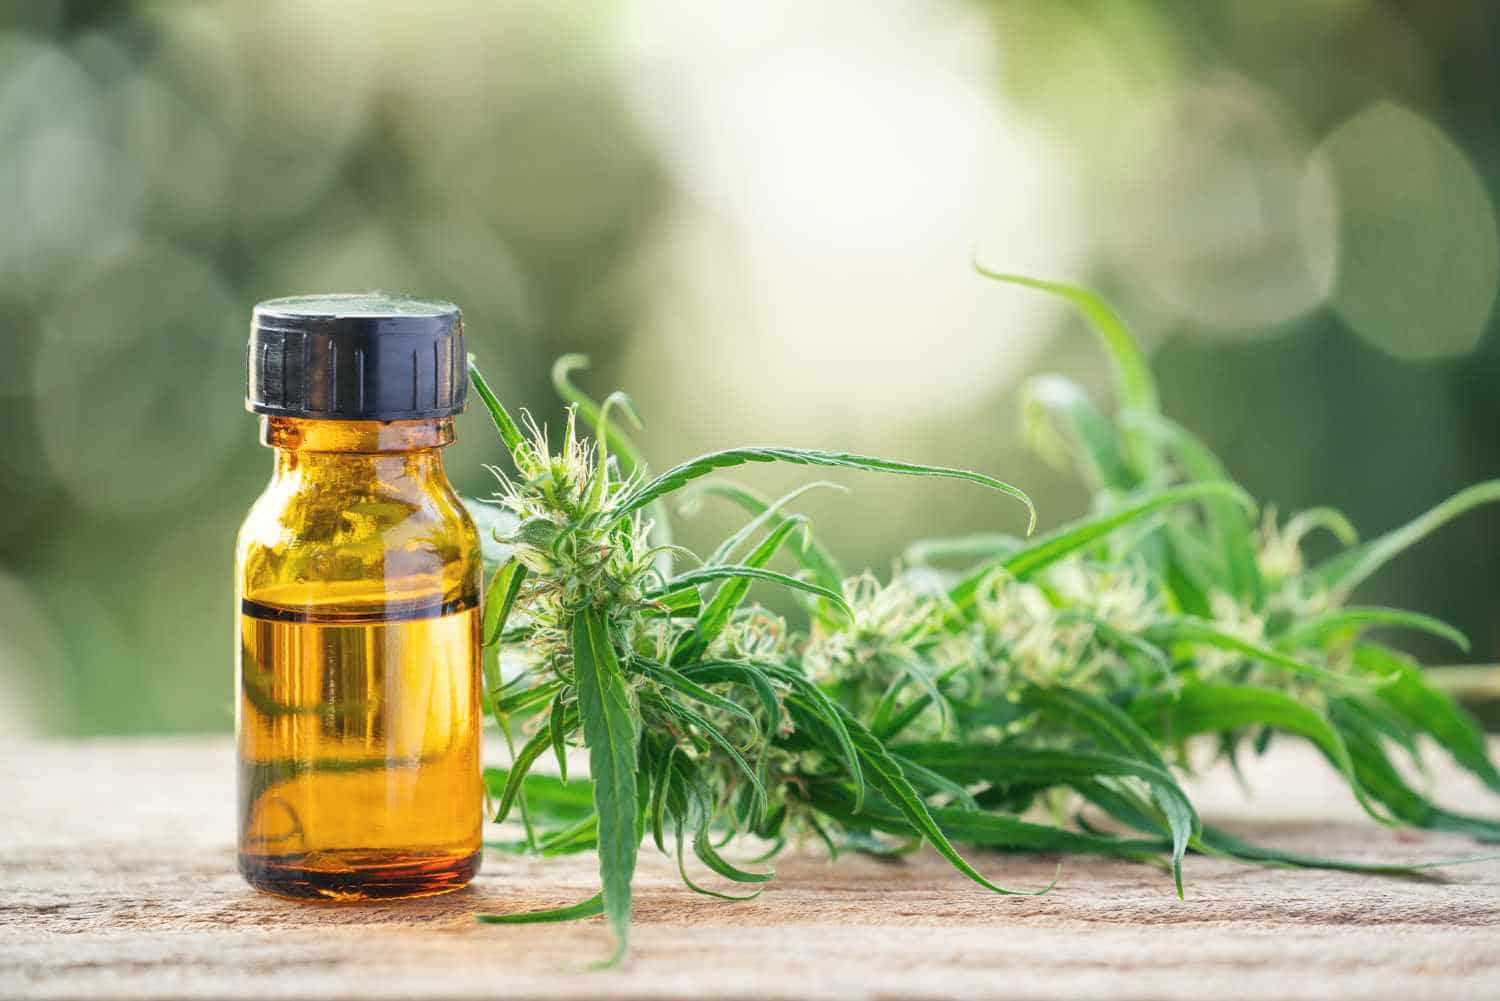 What Does CBD Oil do, and what are it's Side Effects?